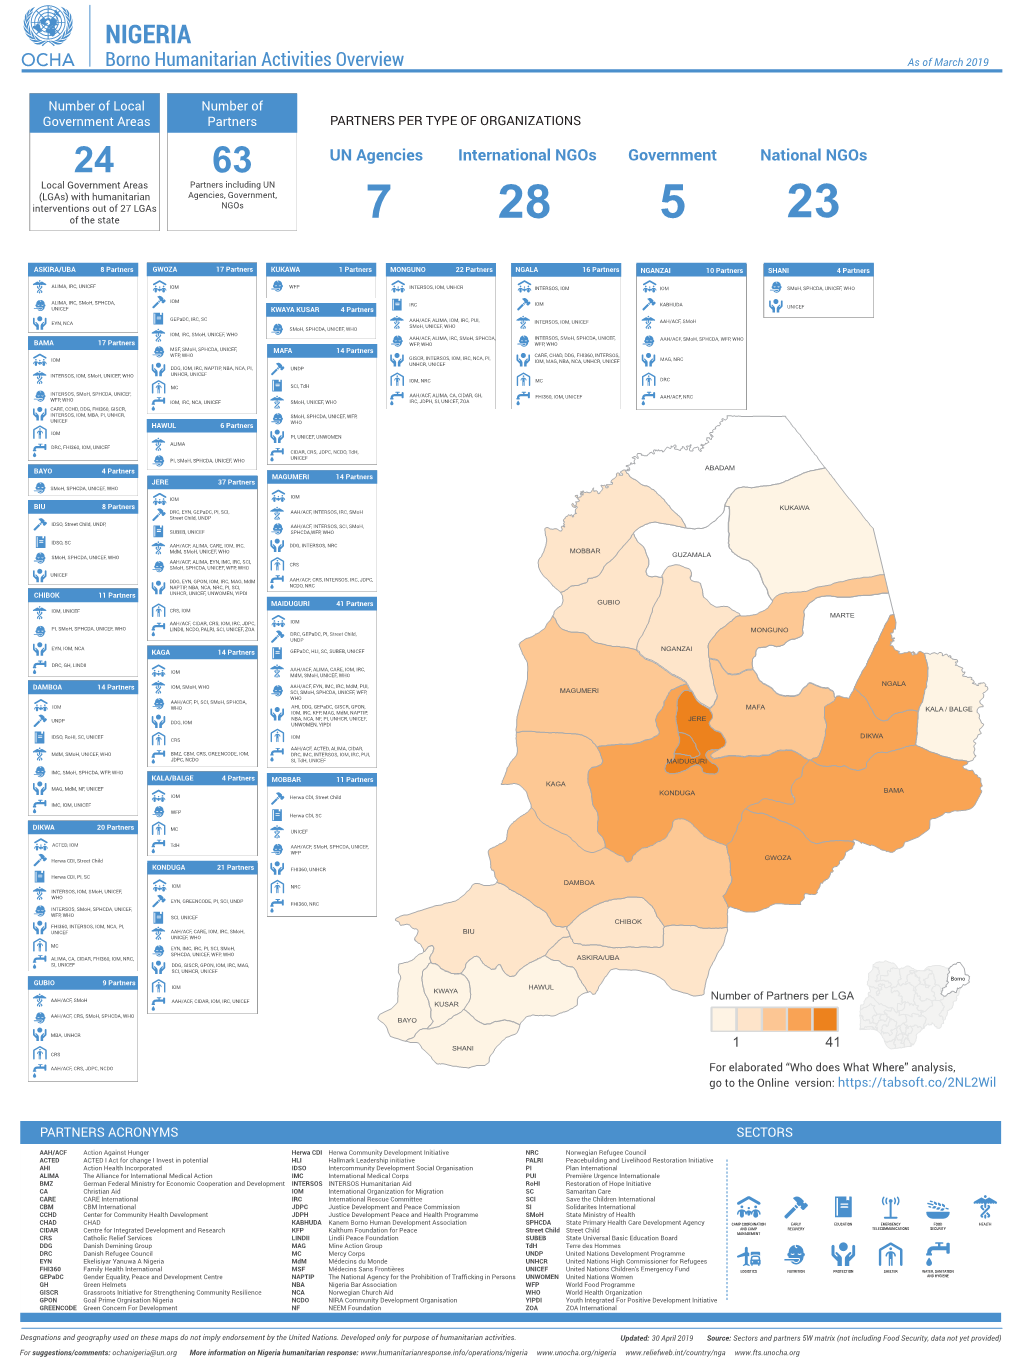 NIGERIA Borno Humanitarian Activities Overview As of March 2019